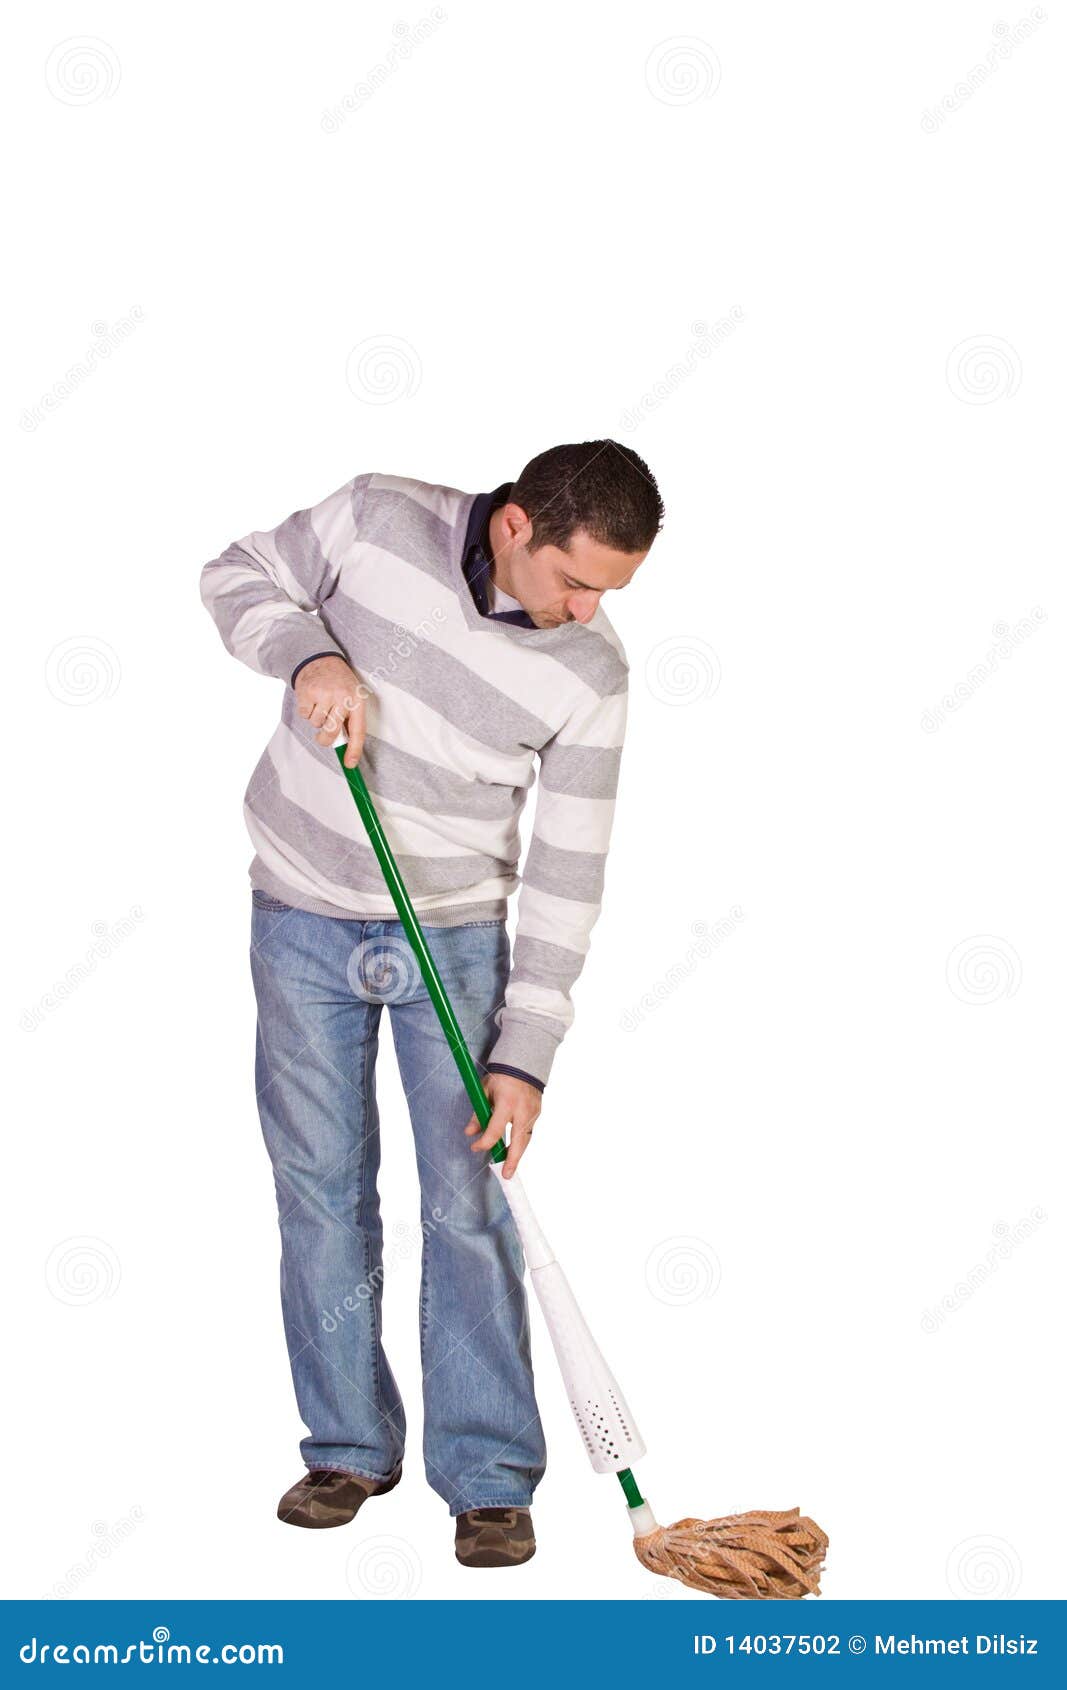 clipart man mopping floor - photo #34